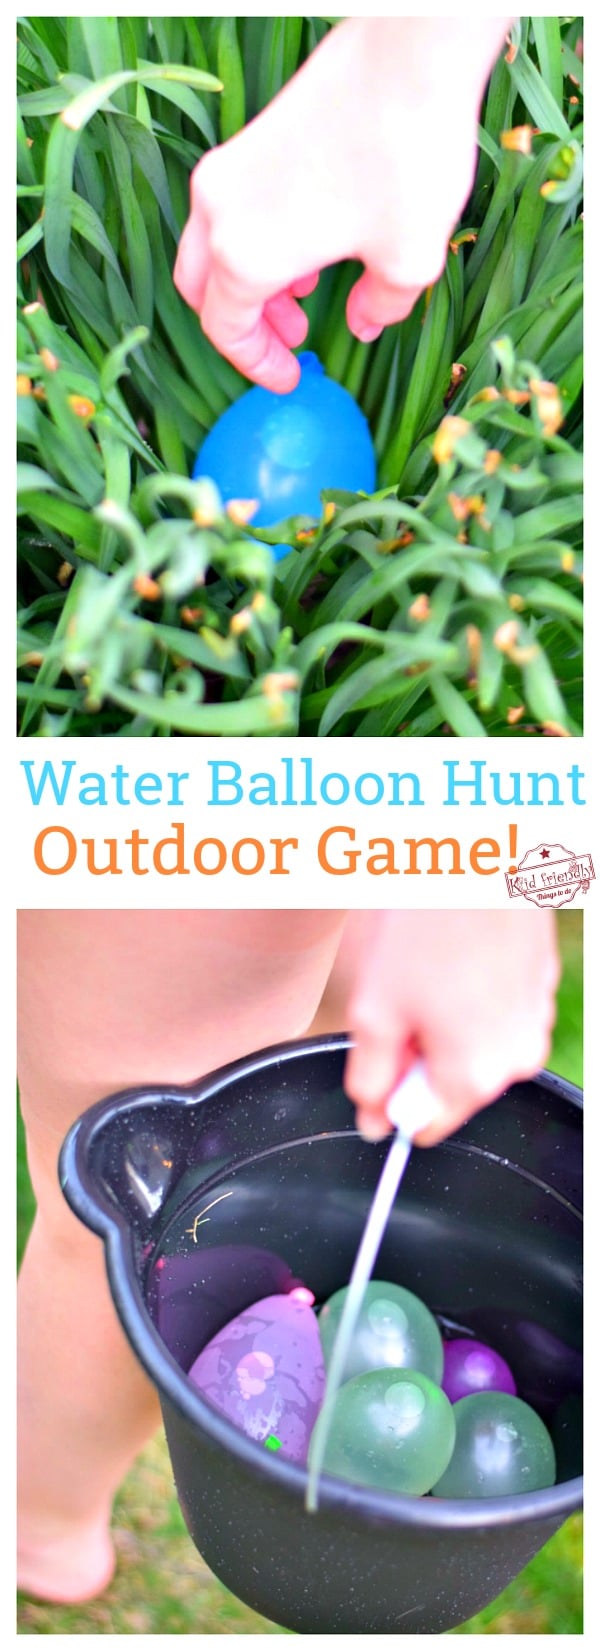 Water Balloon Hunt Outdoor Game for Kids 